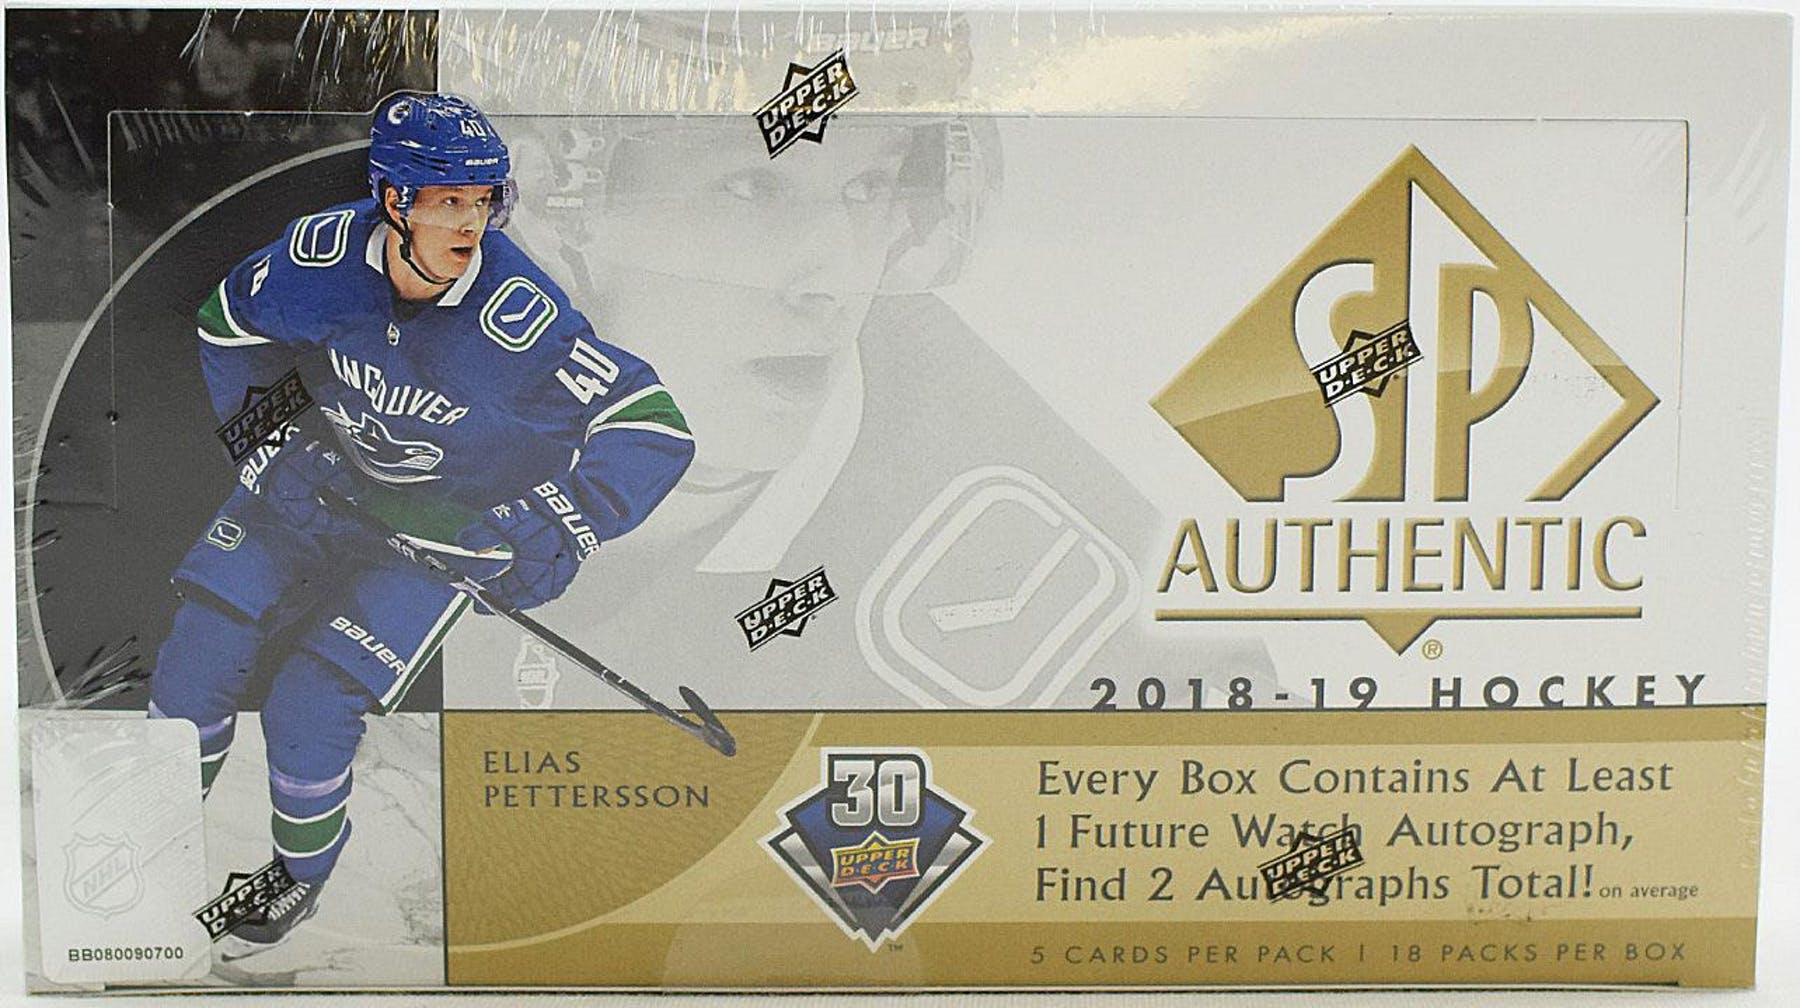 2018-19 Upper Deck SP Authentic Hockey Hobby Case (Boxes of 8) - BigBoi Cards